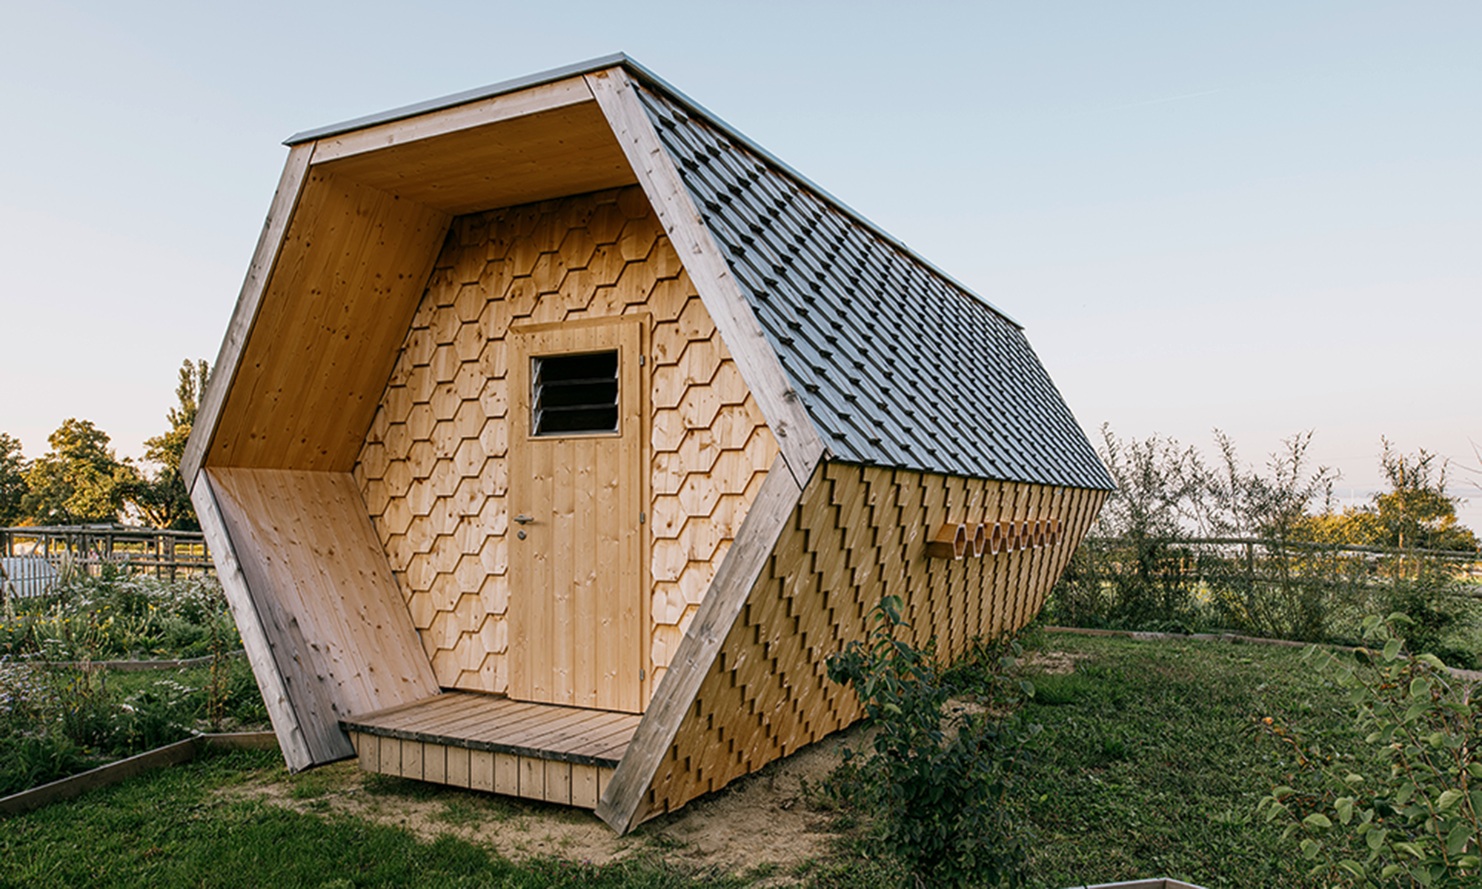 Honeycomb-shaped bee house with its facade of hexagonal wood shingles nestled in a flowering meadow.